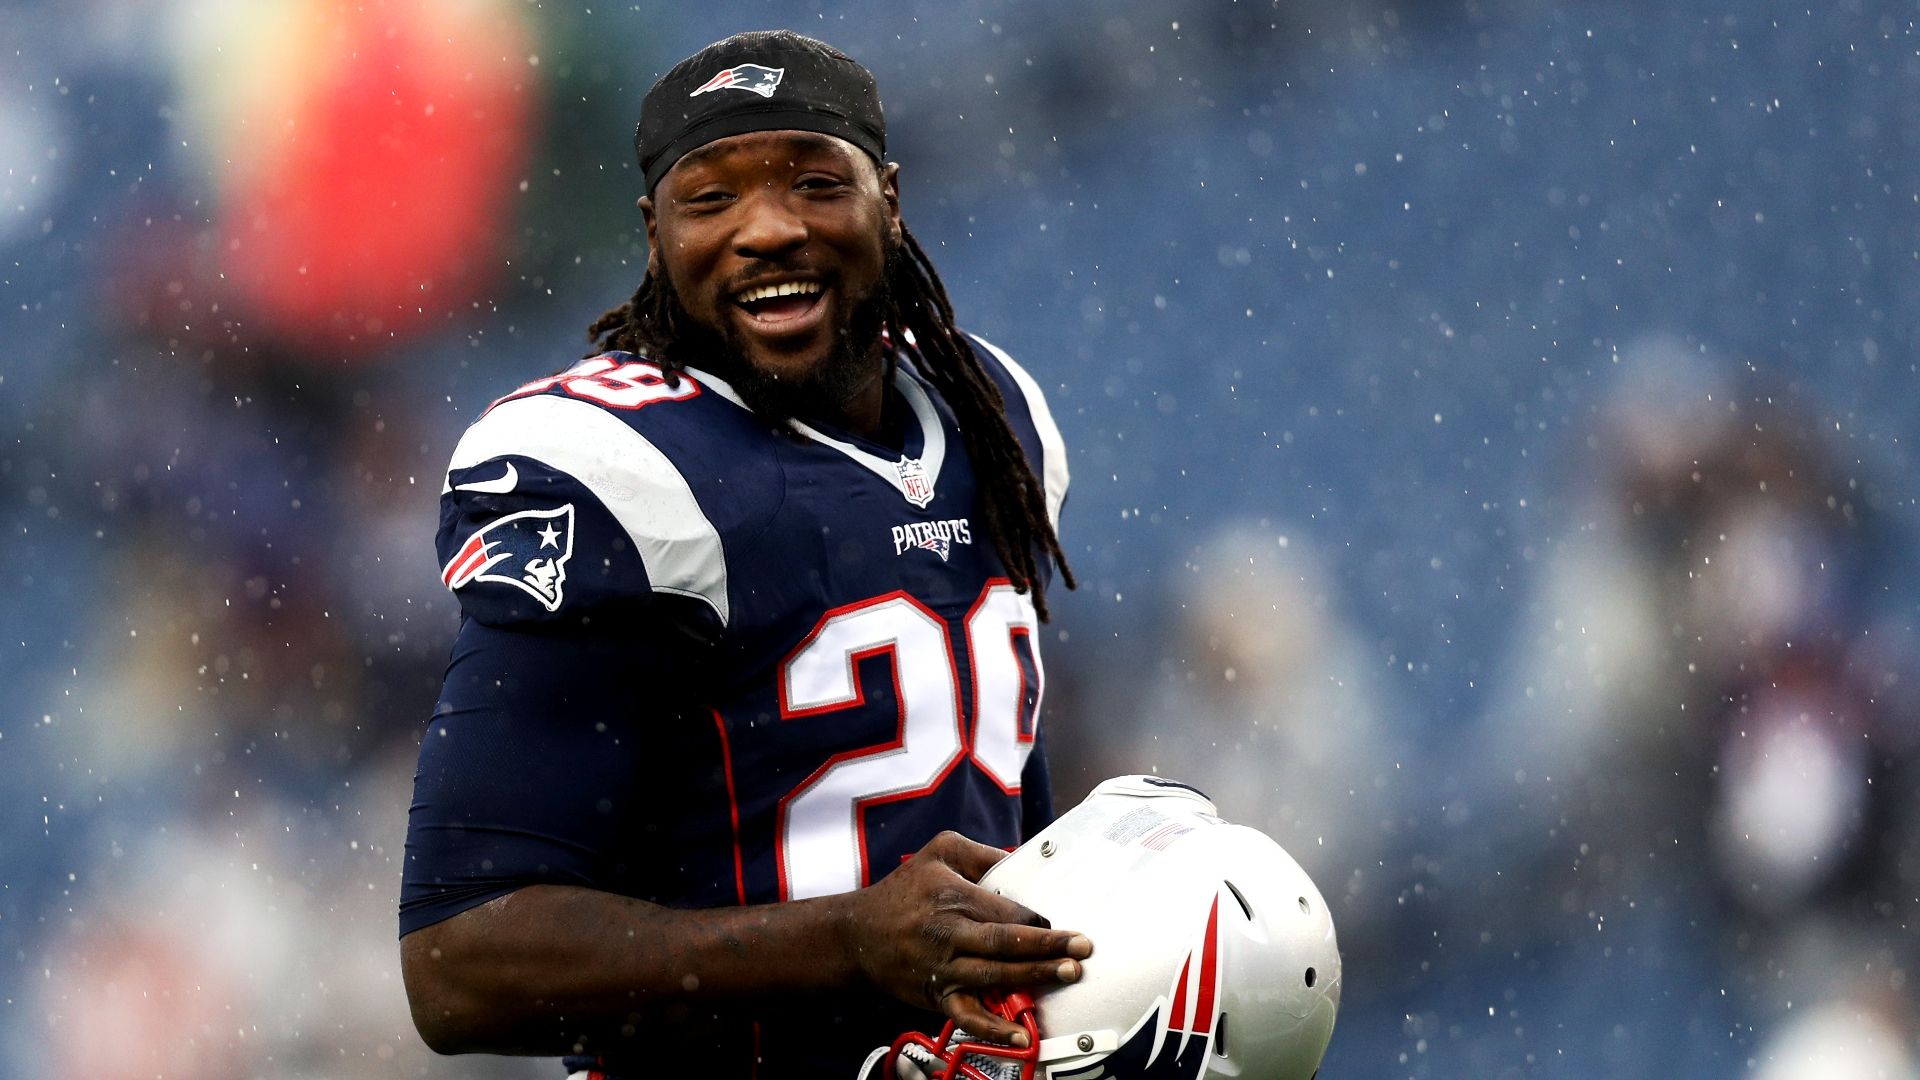 Eagles add Blount to complement RB corps